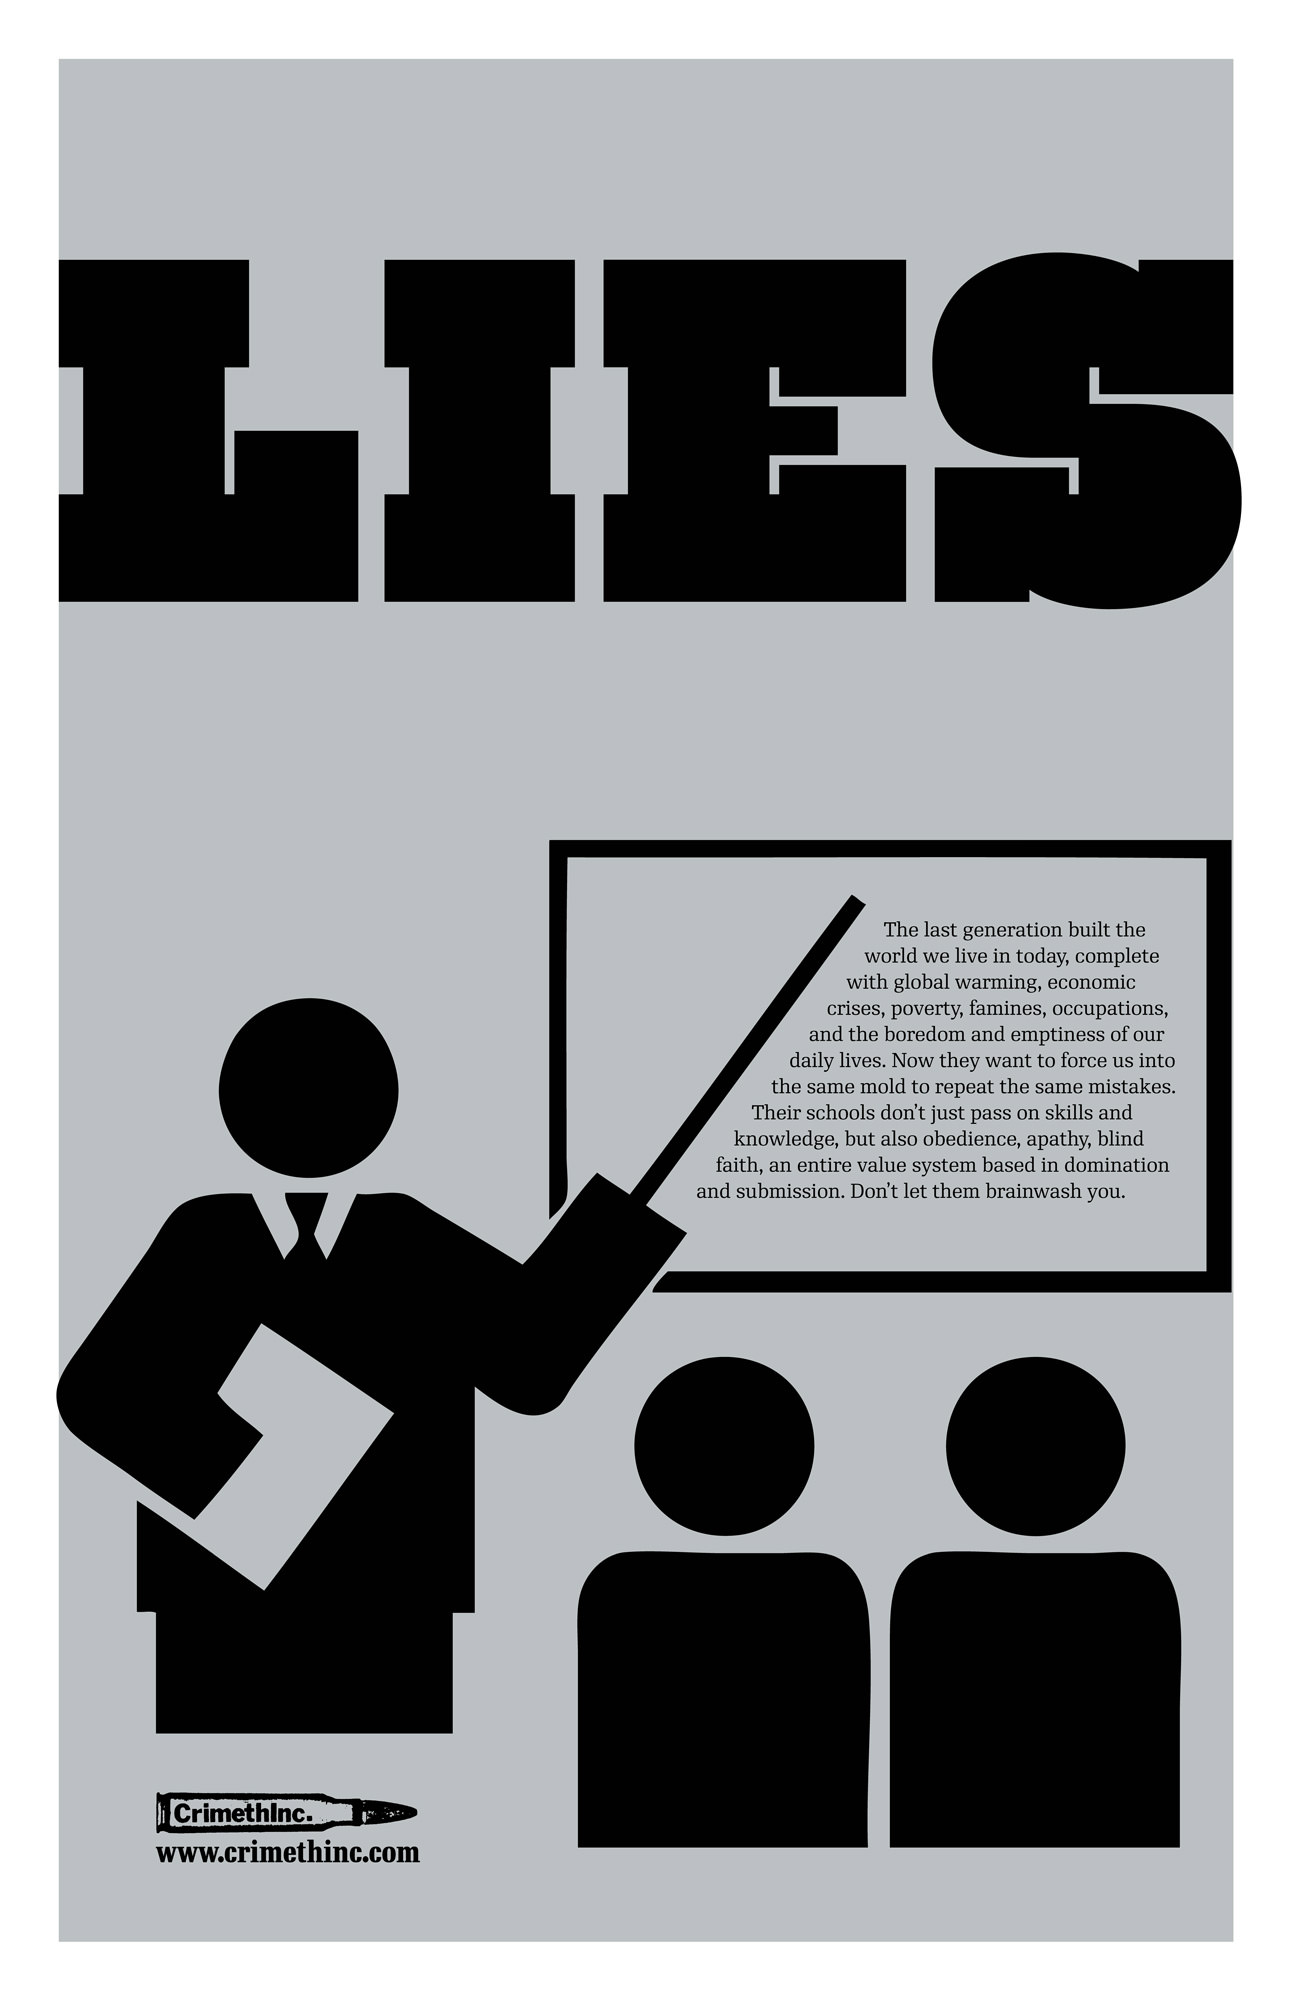 Photo of ‘Lies’ front side